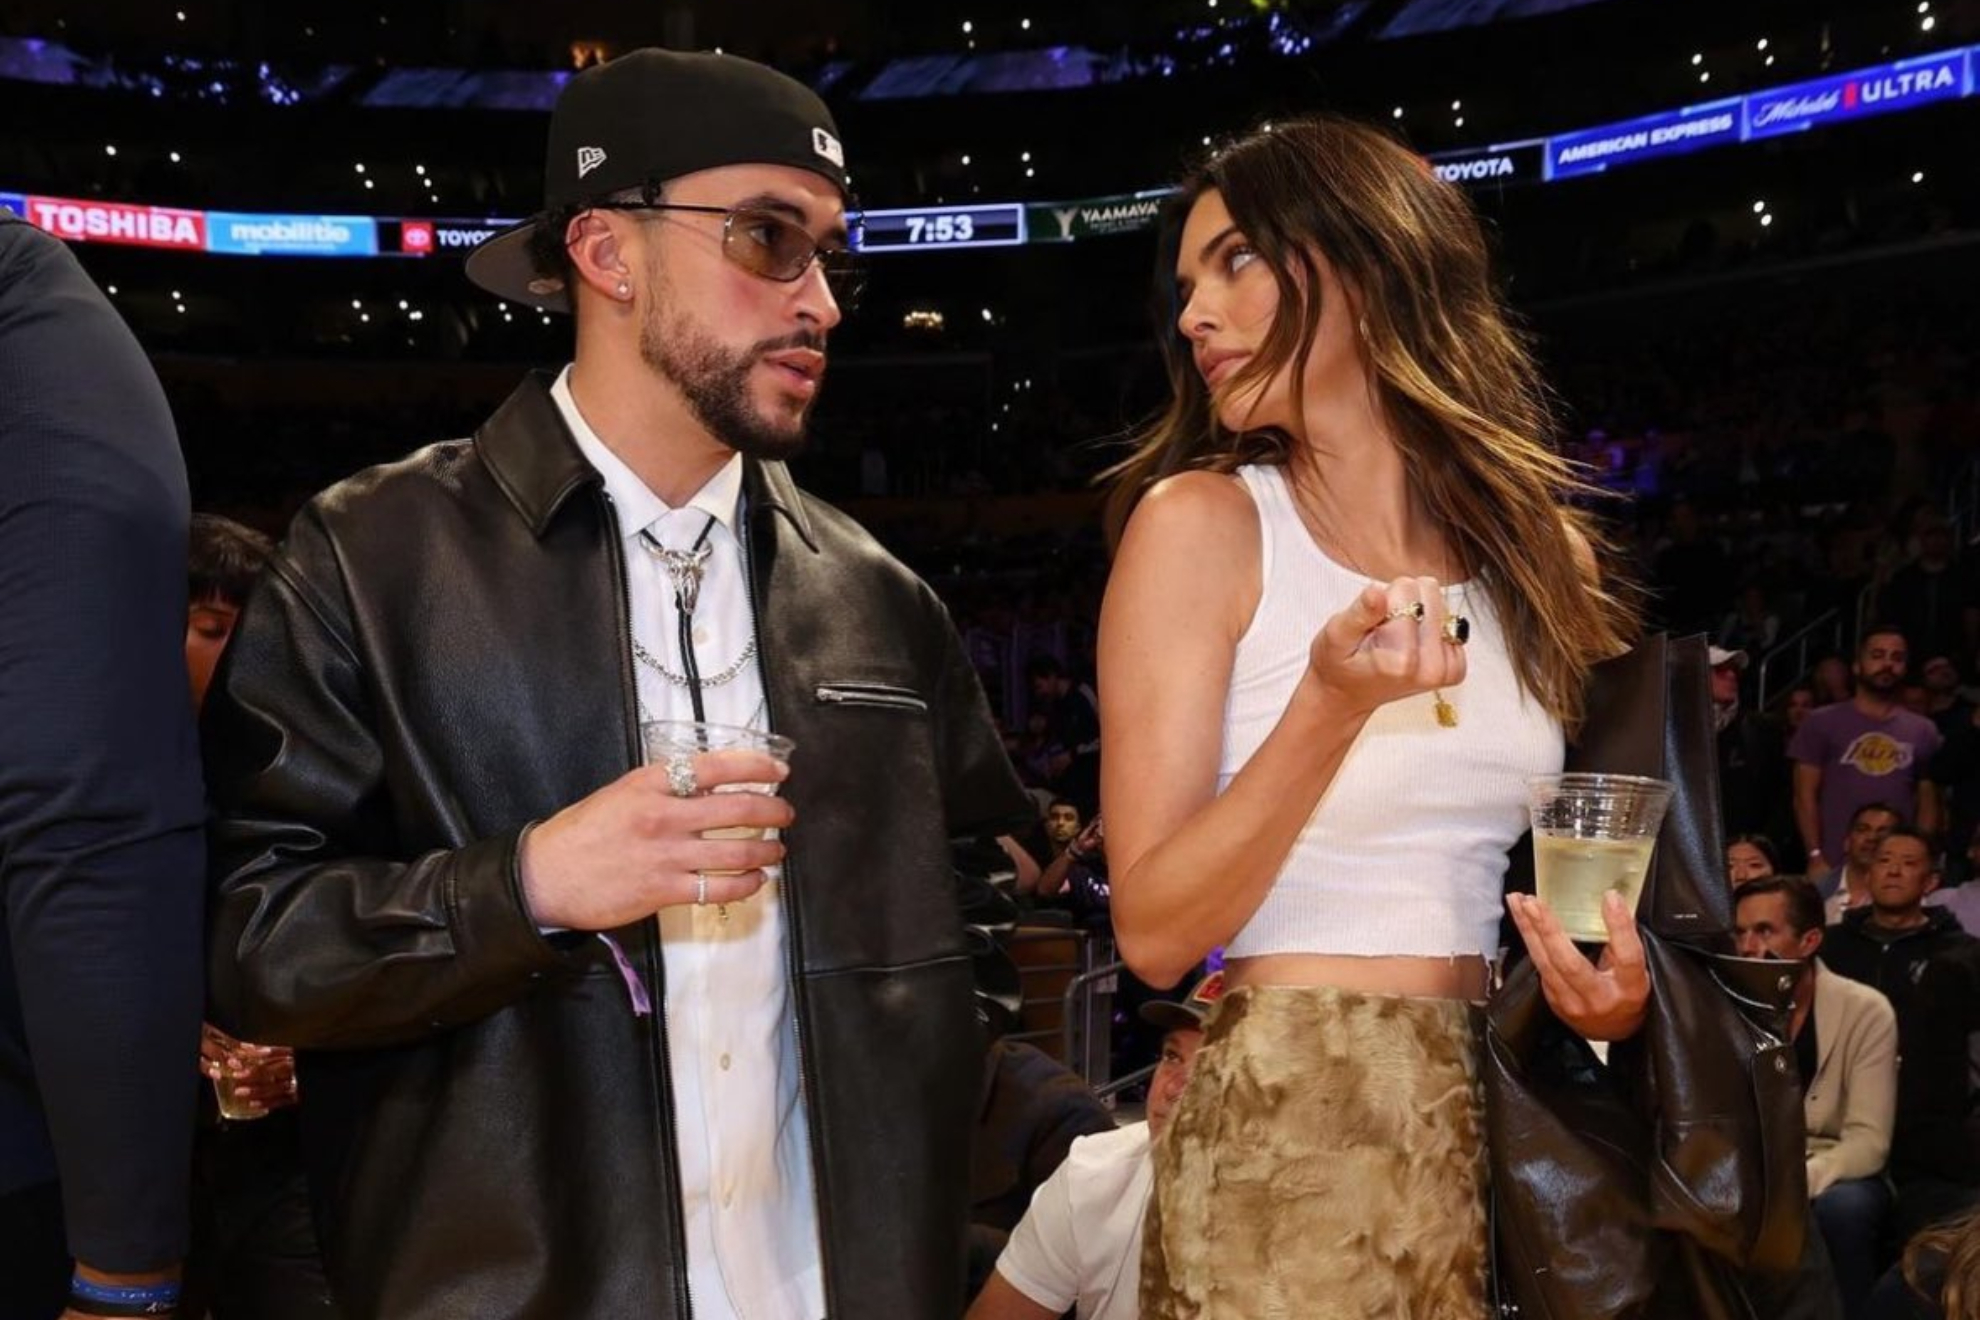 Kendall Jenner and Bad Bunny have been going out since New Years Eve, Is there a reconciliation in the works?